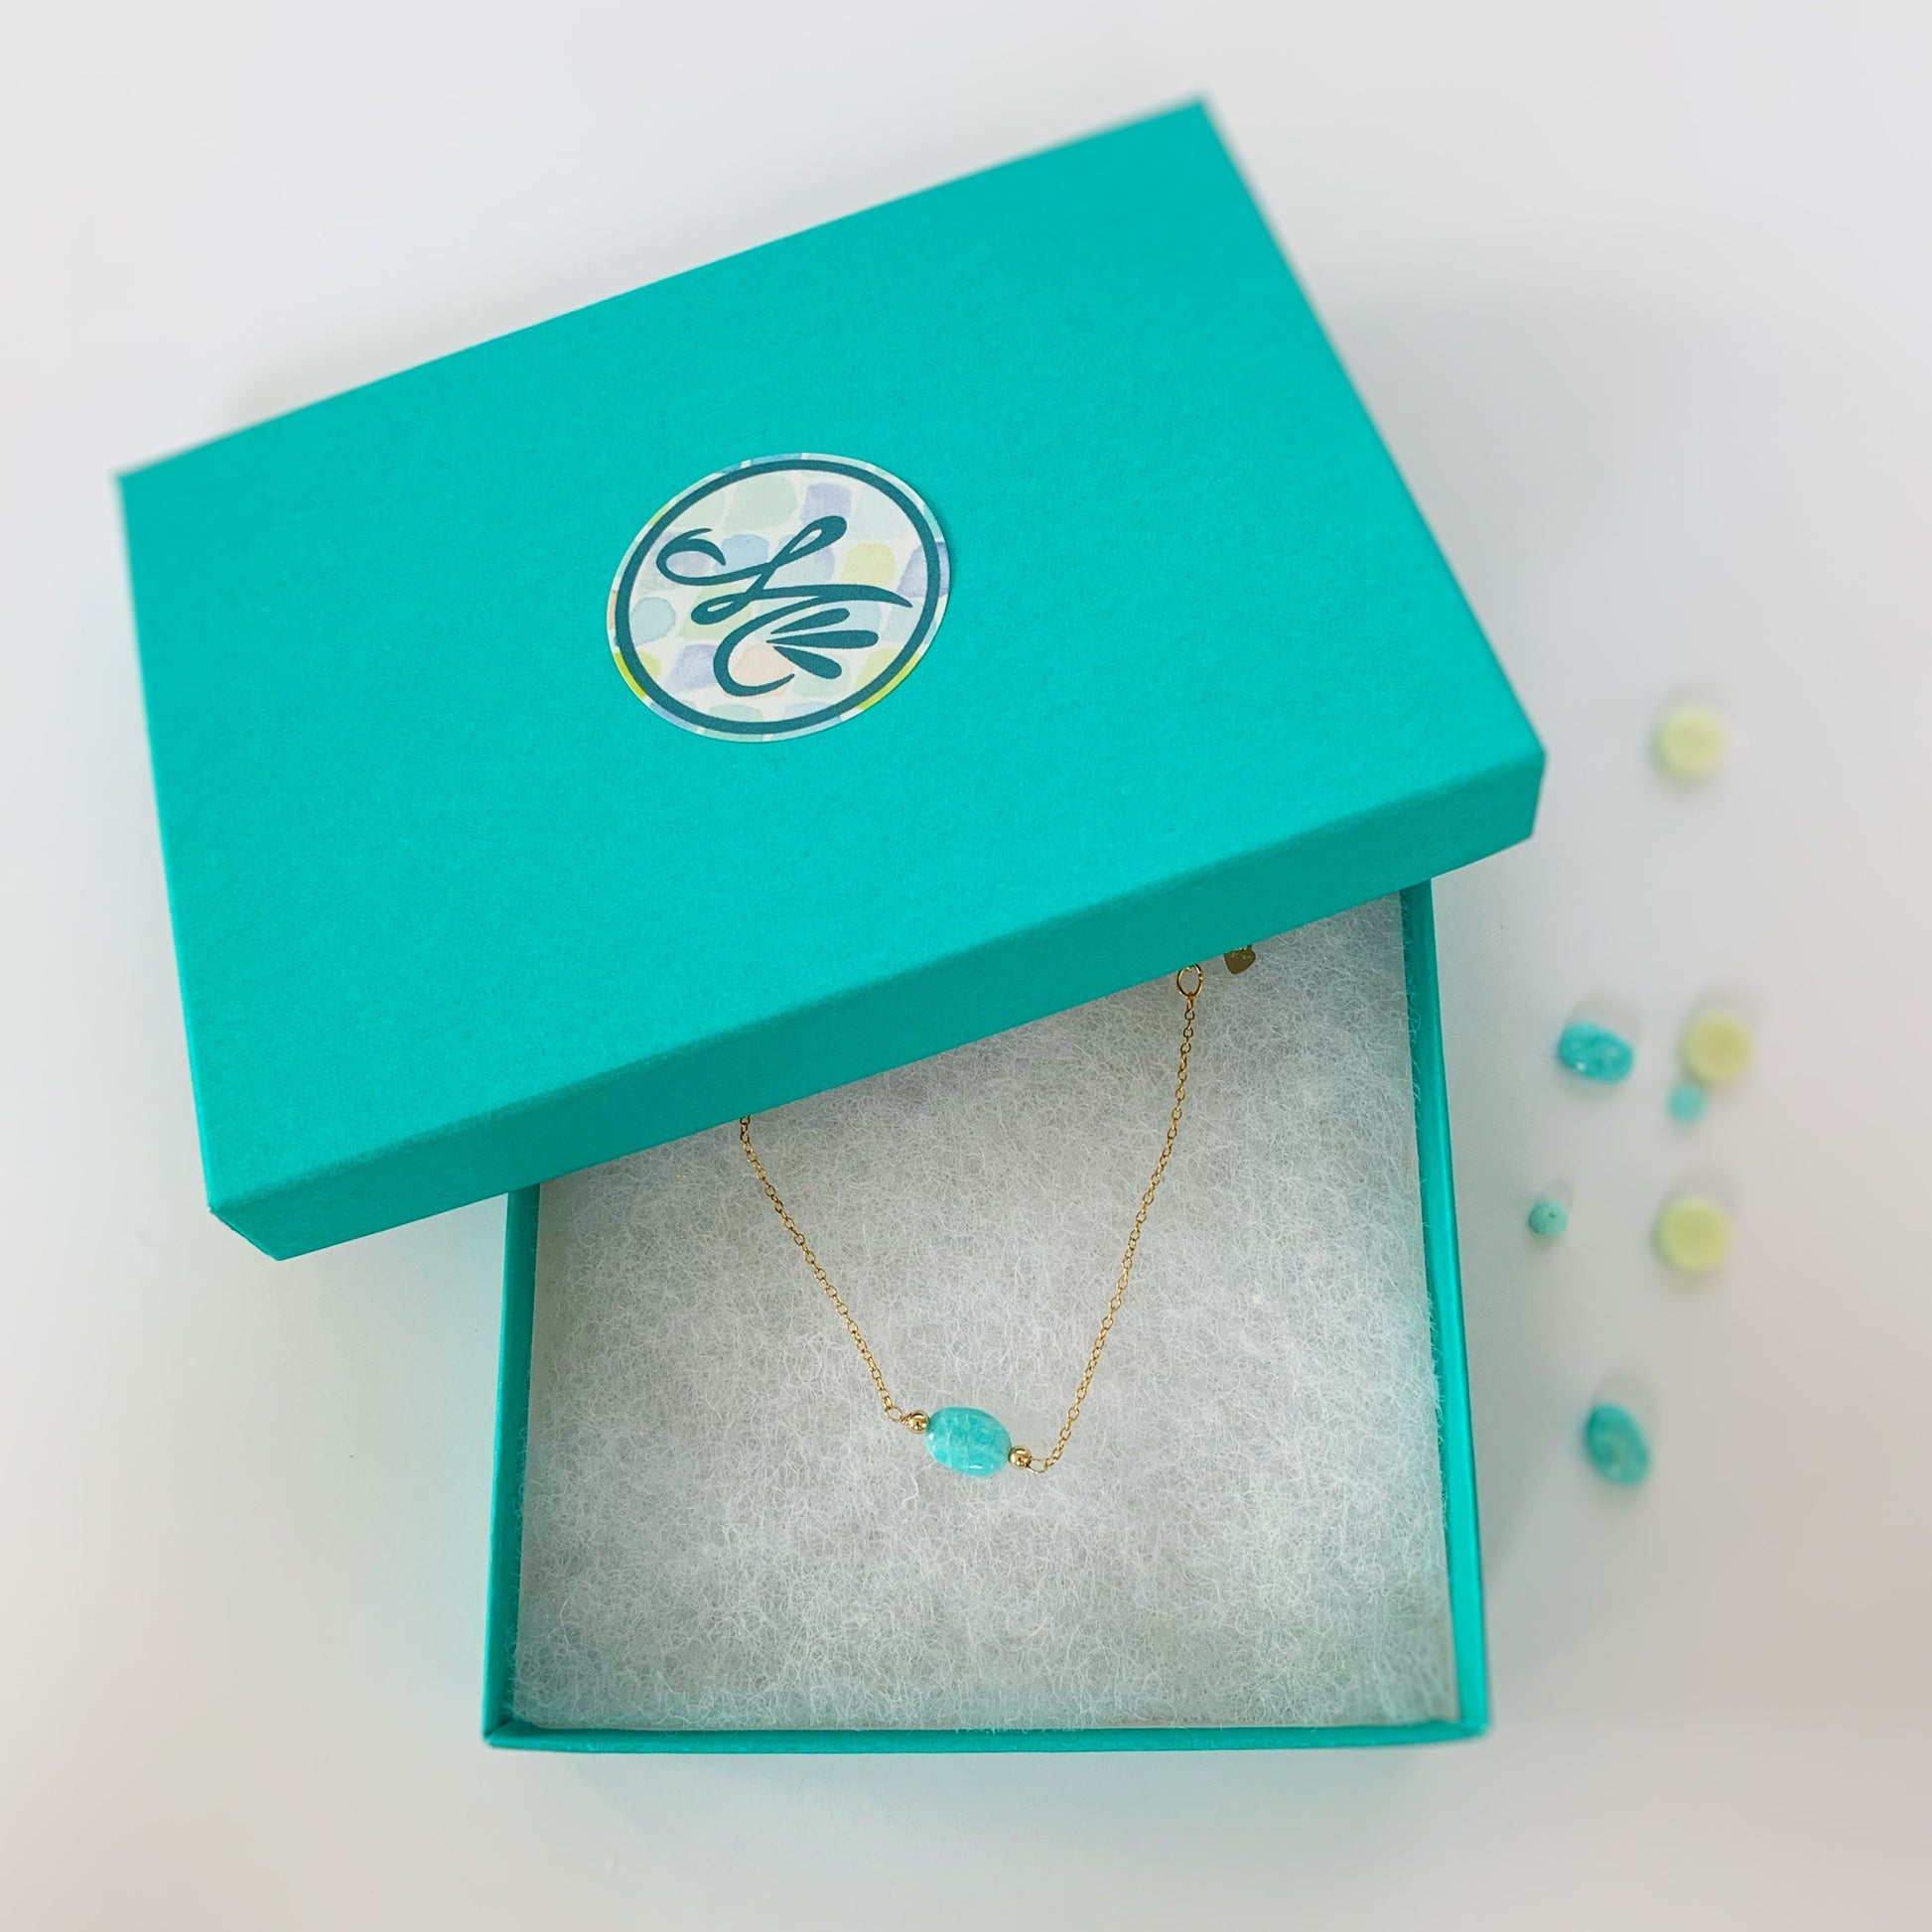 Boxed Laguna adjustable bracelet. This laguna bracelet is created with 14k gold filled chain and findings and a bright aqua oval shaped amazonite bead at the center of the bracelet. This bracelet is pictured in a cotton lined teal gift box with an M mermaids and madeleines logo sticker on the lid. The item is photographed on a white background